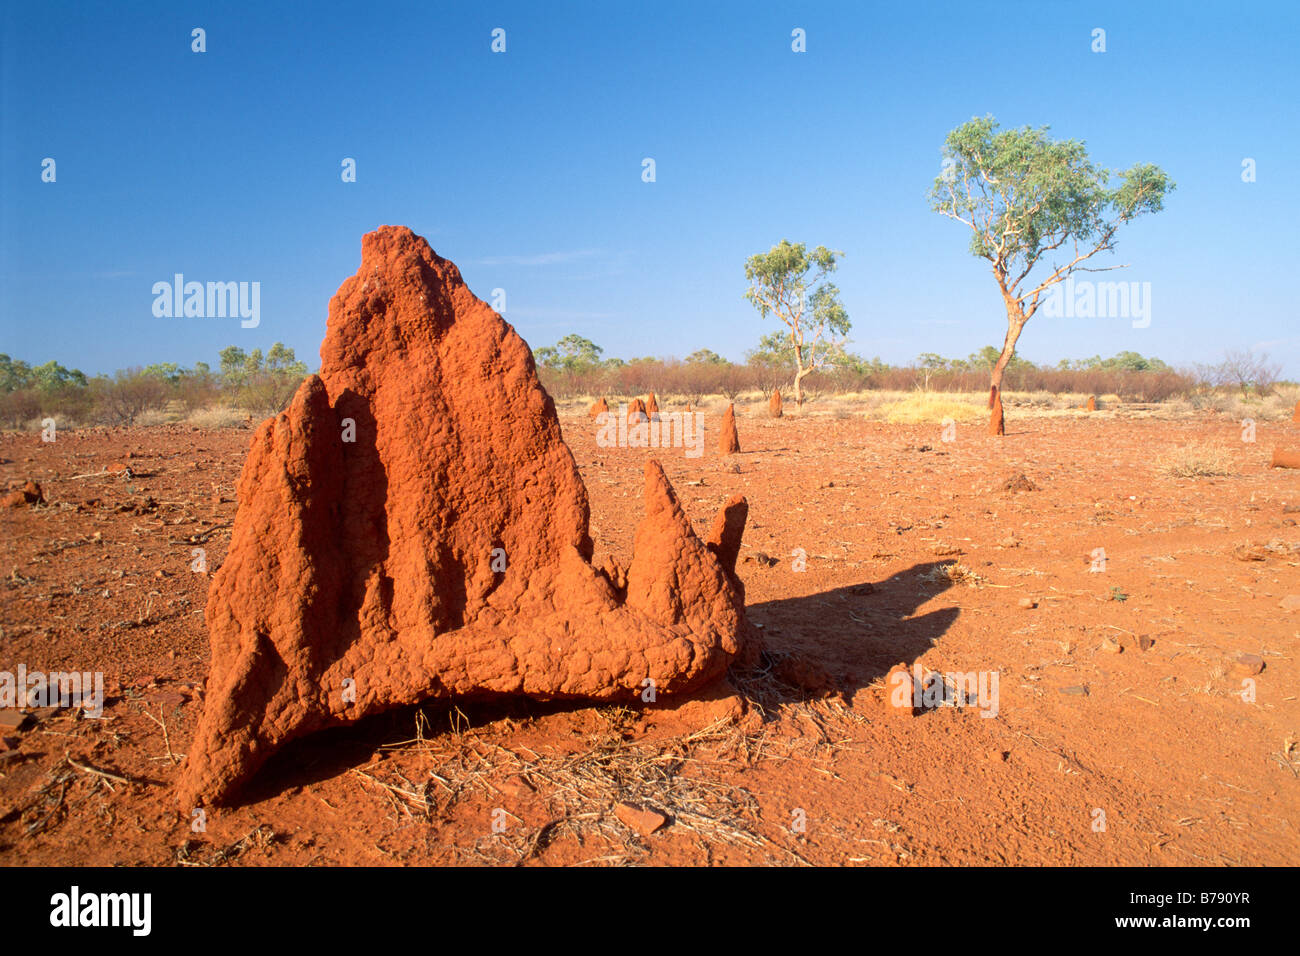 Termite hills in the outback, Northern Territory, Australia Stock Photo